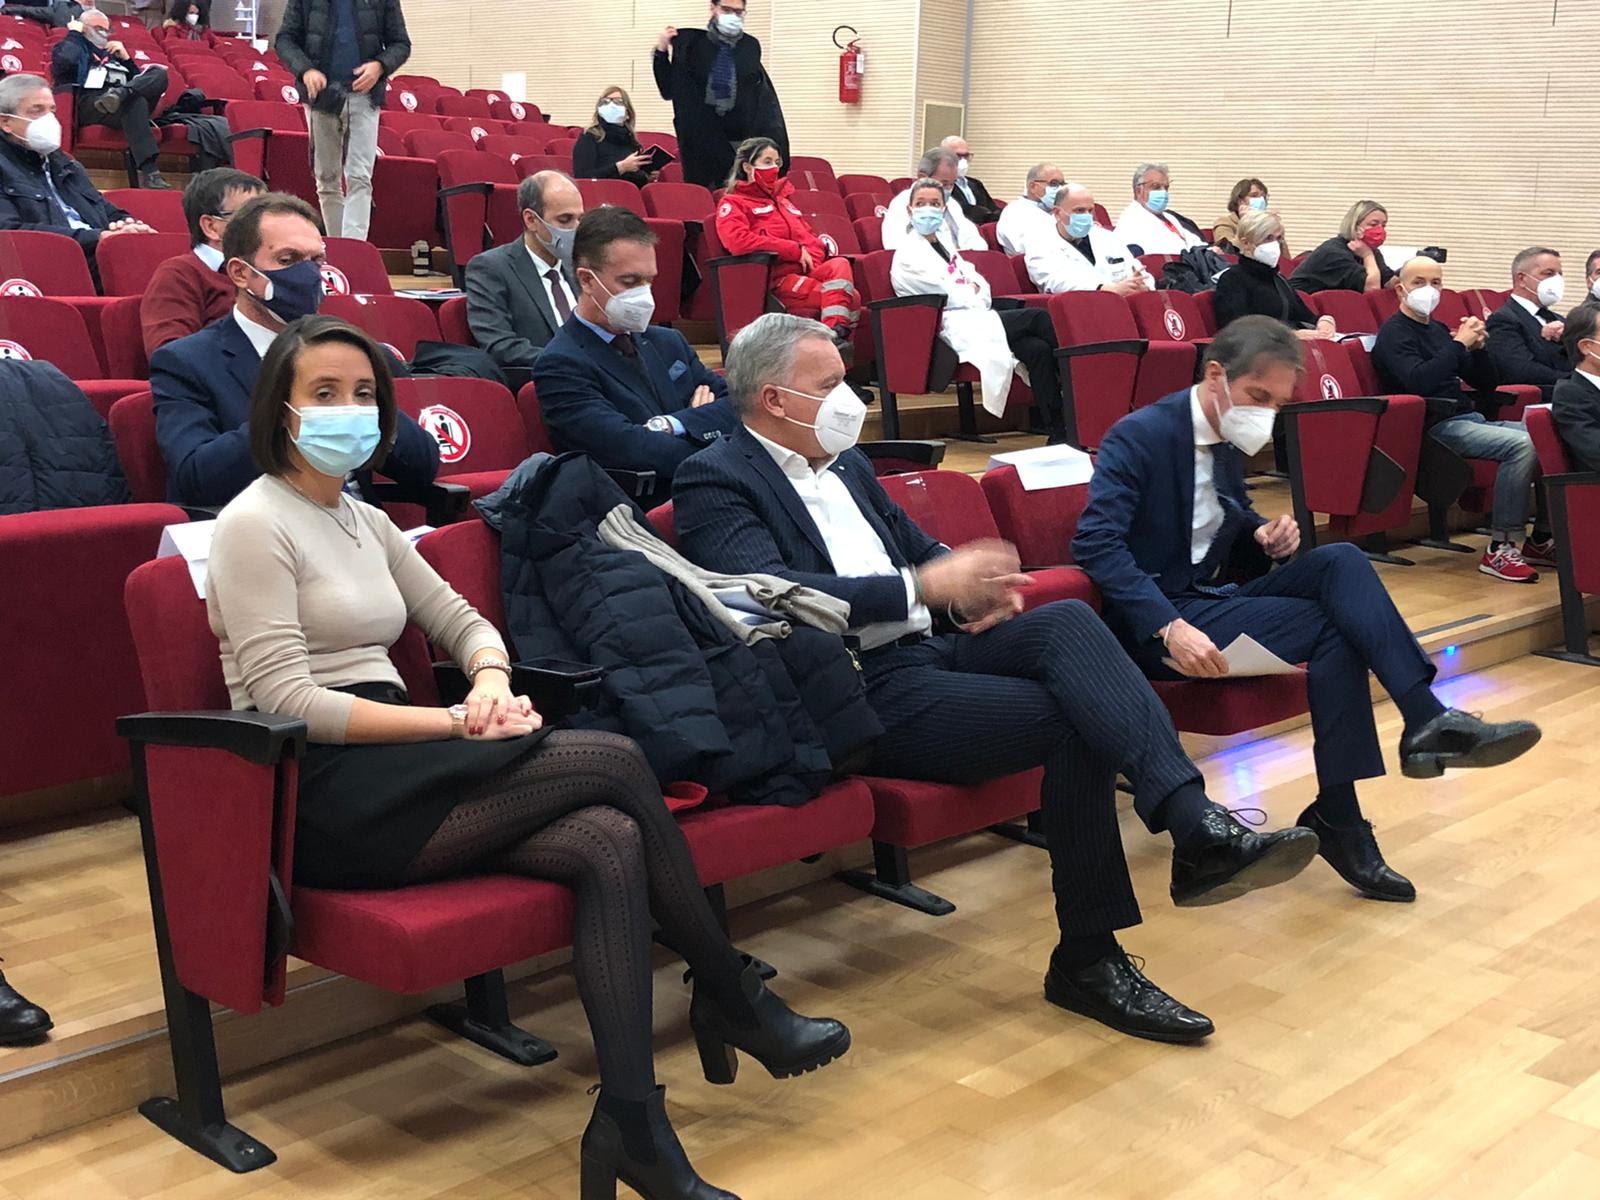 vaccination day Monza, l'assessore Cambiaghi